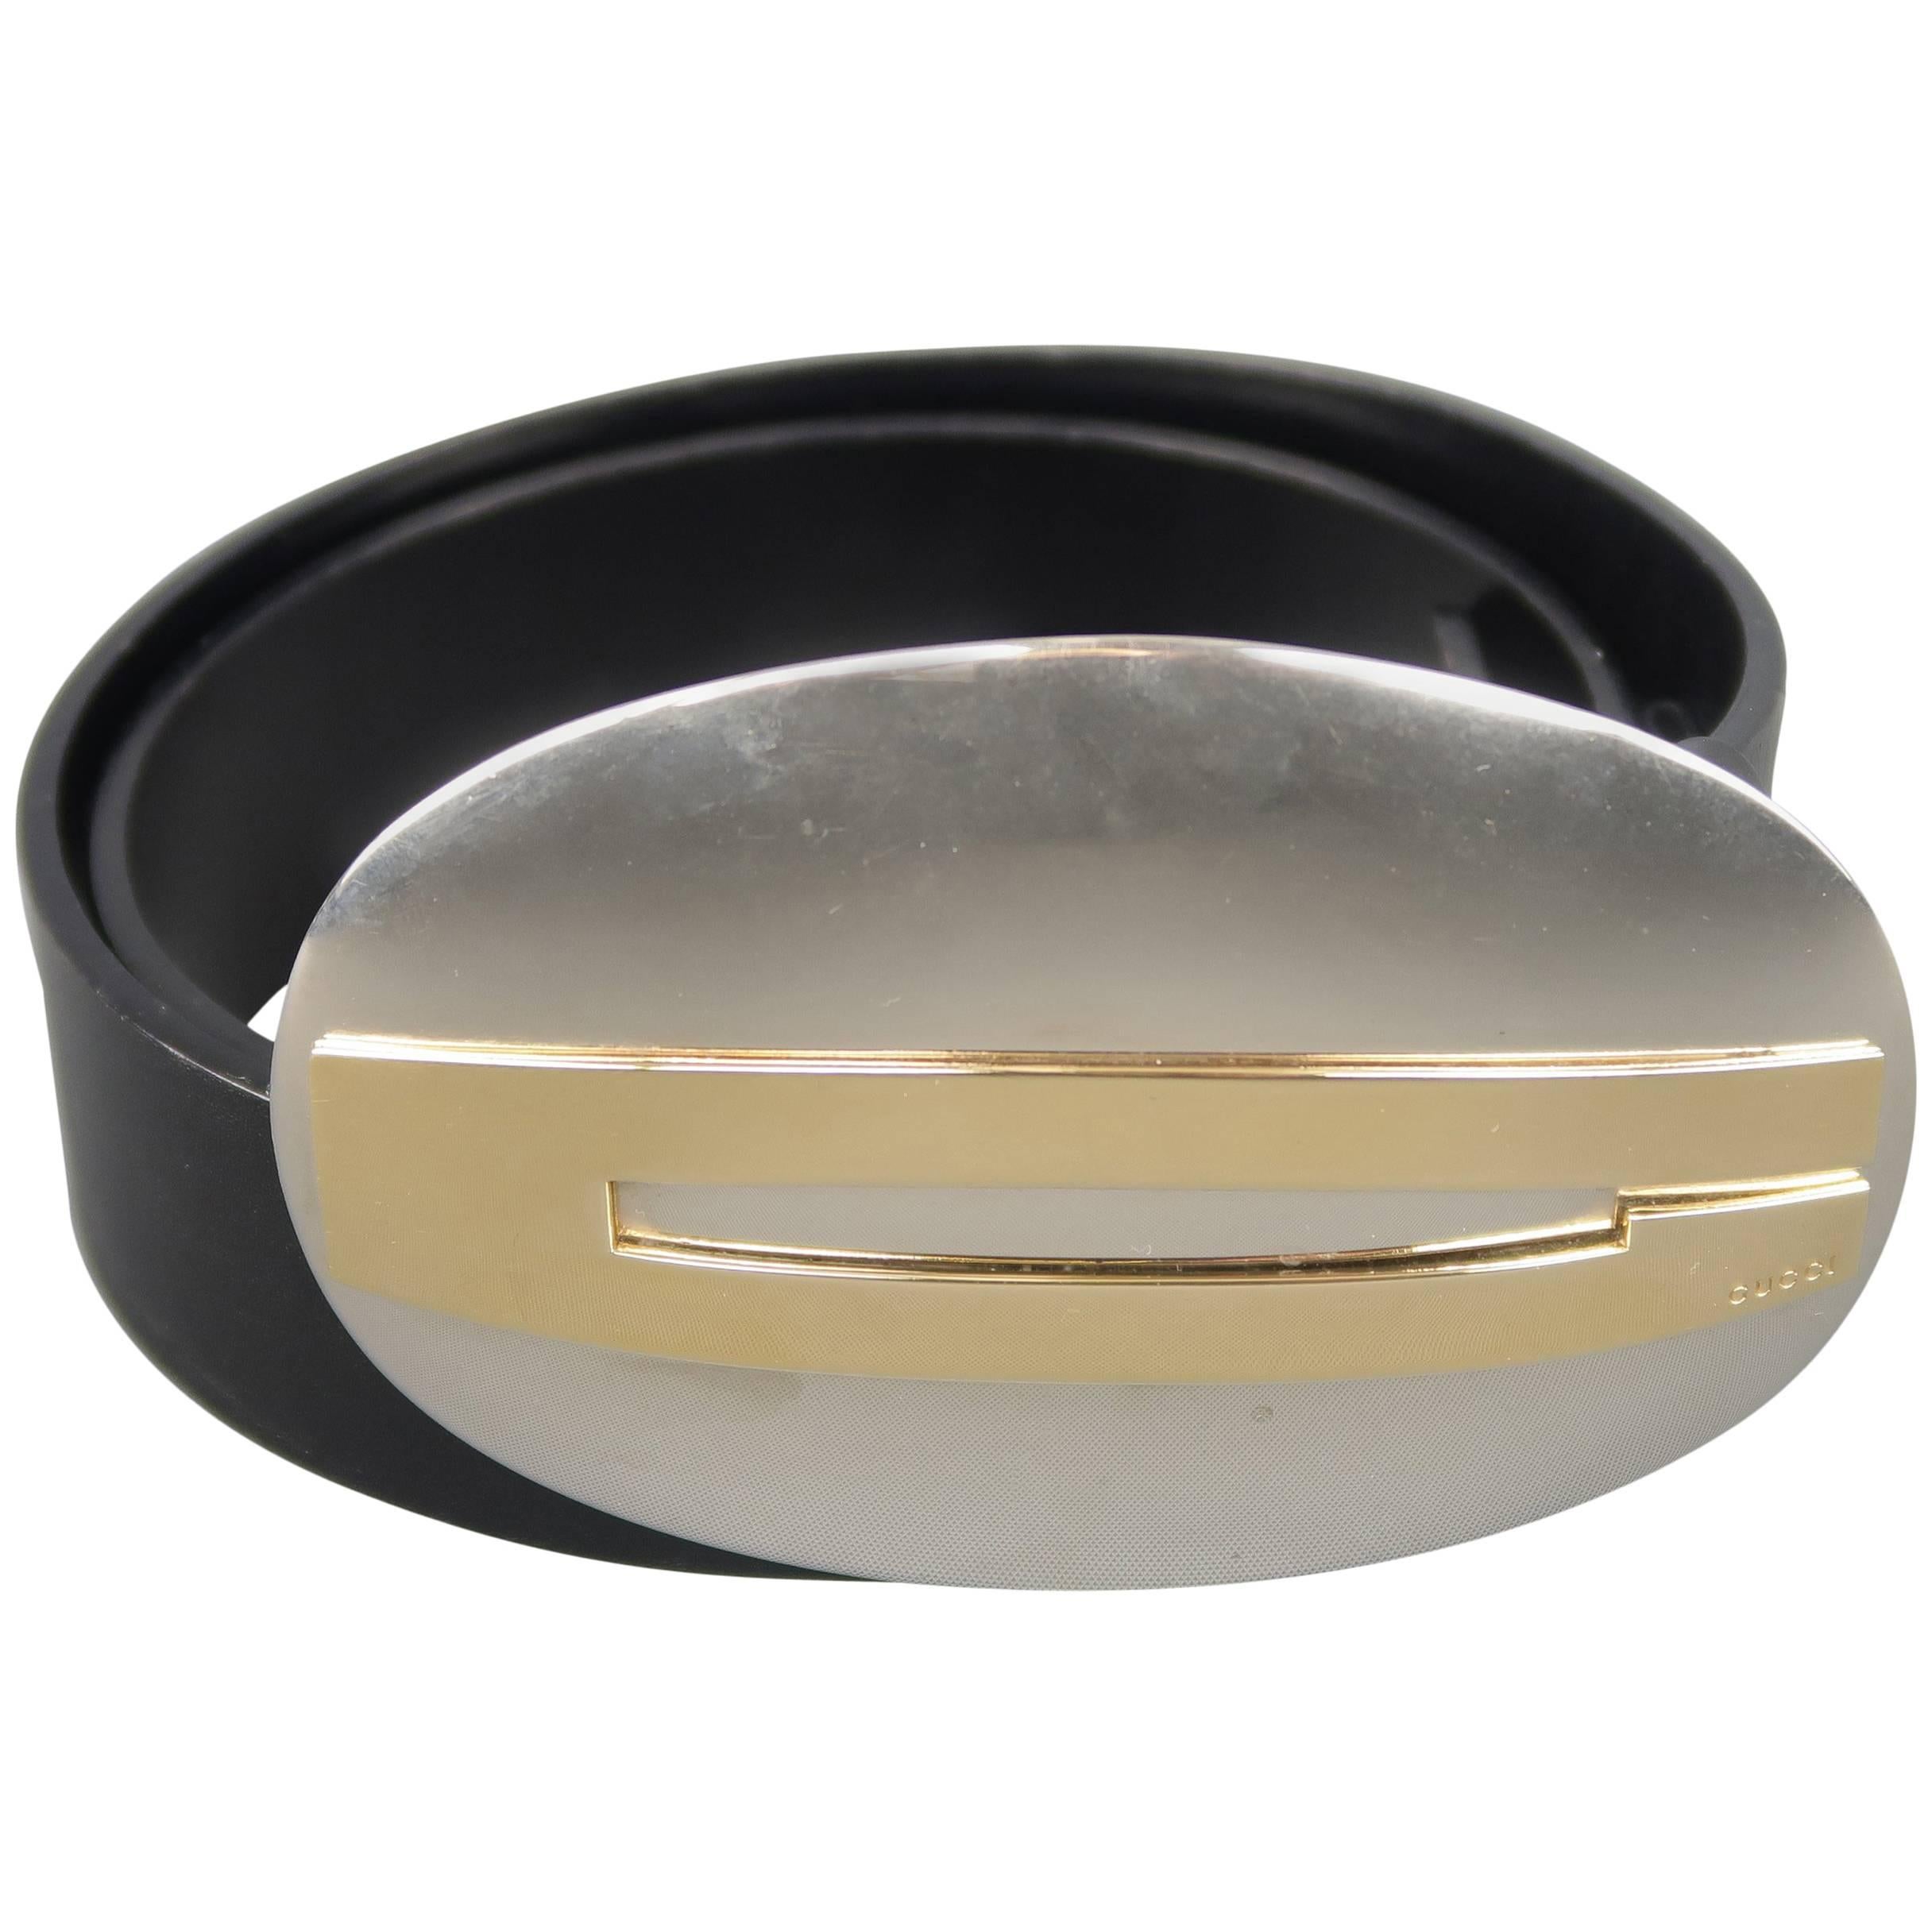  GUCCI M Large Silver & Gold Oval G Buckle Black Leather Belt